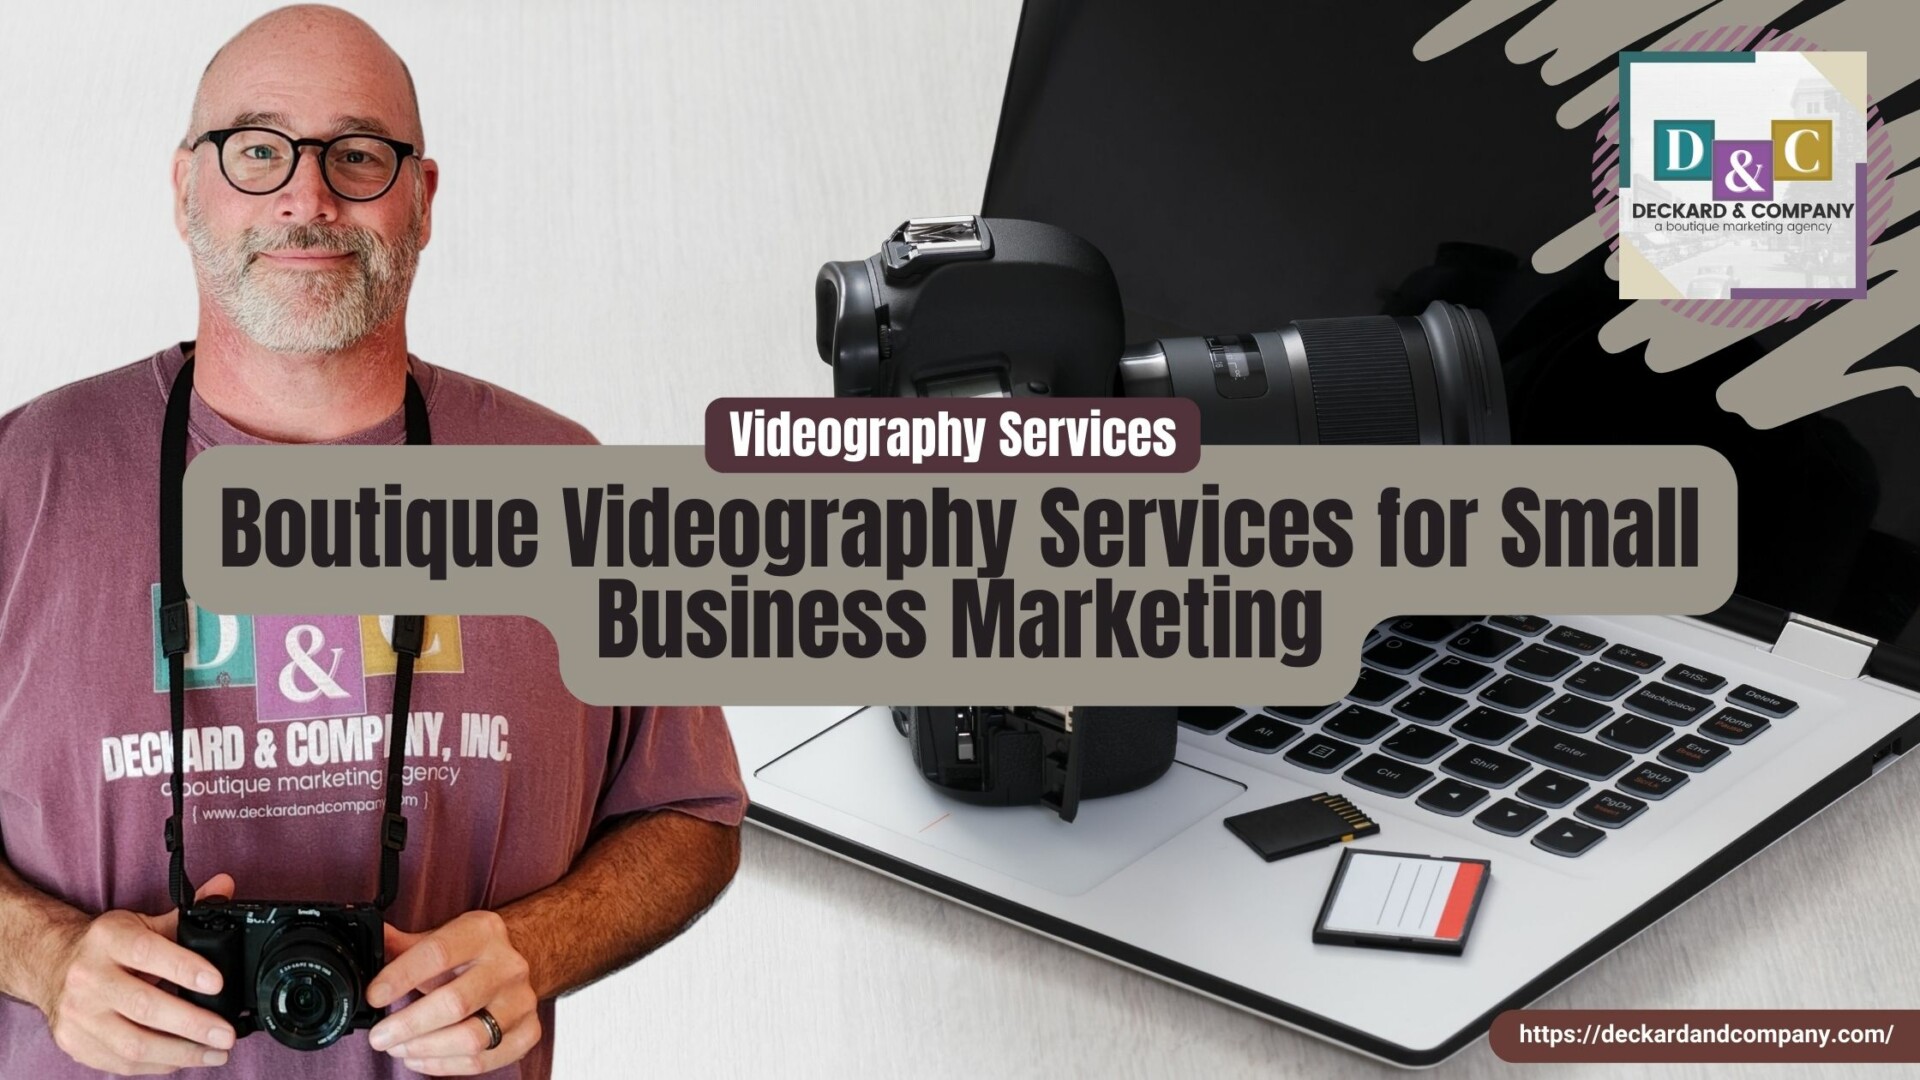 Boutique Videography Services for Small Business Marketing by Deckard & Company, a Boutique Marketing Agency